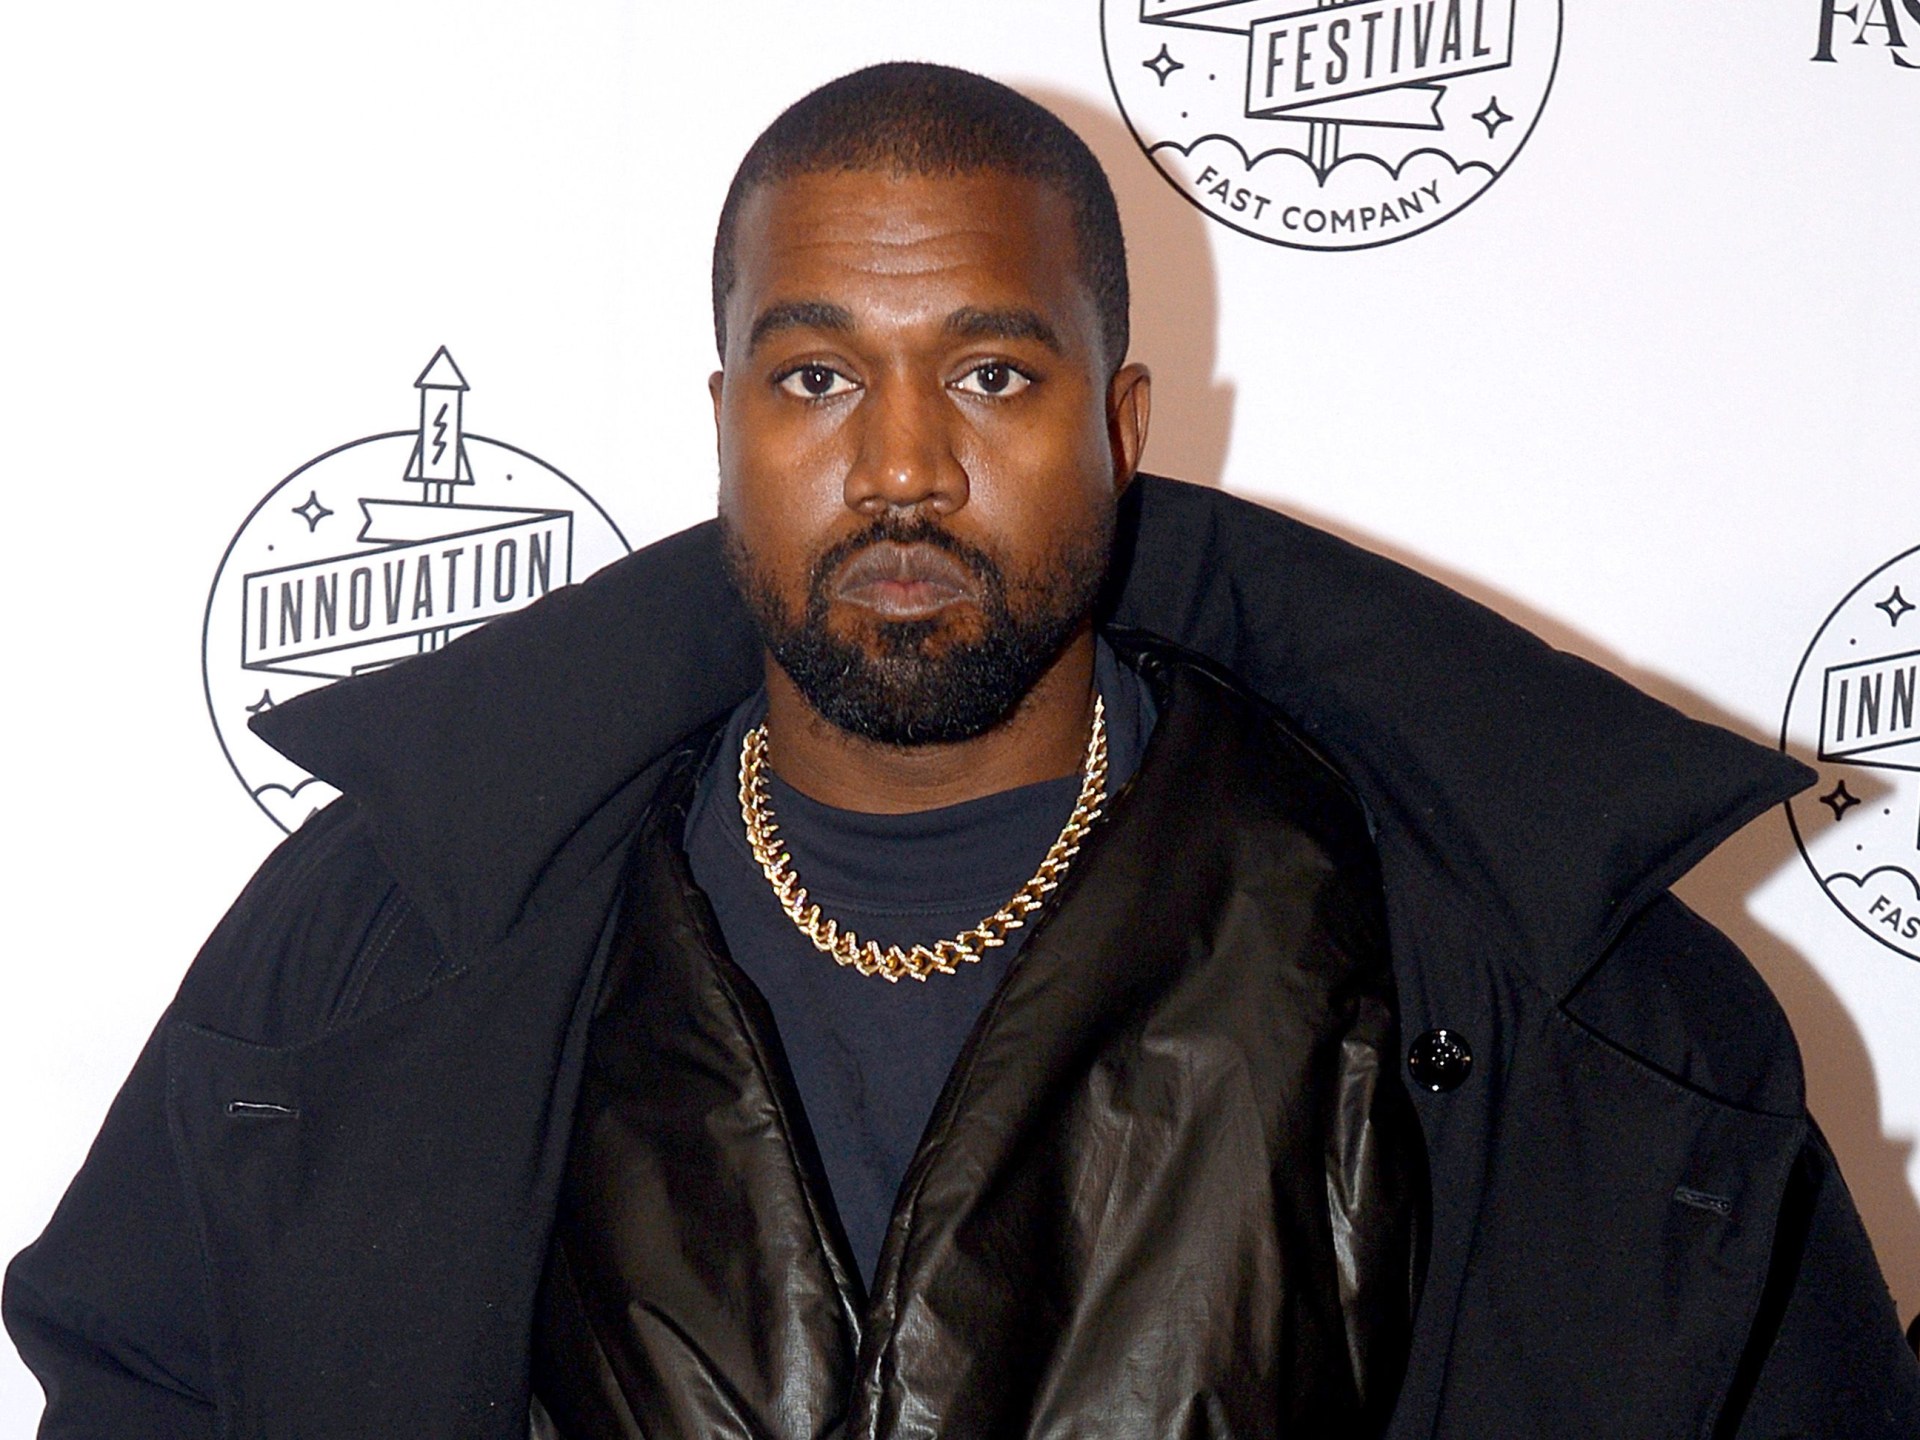 Twitter, Instagram block Kanye West over anti-Semitic posts | Business and Economy News